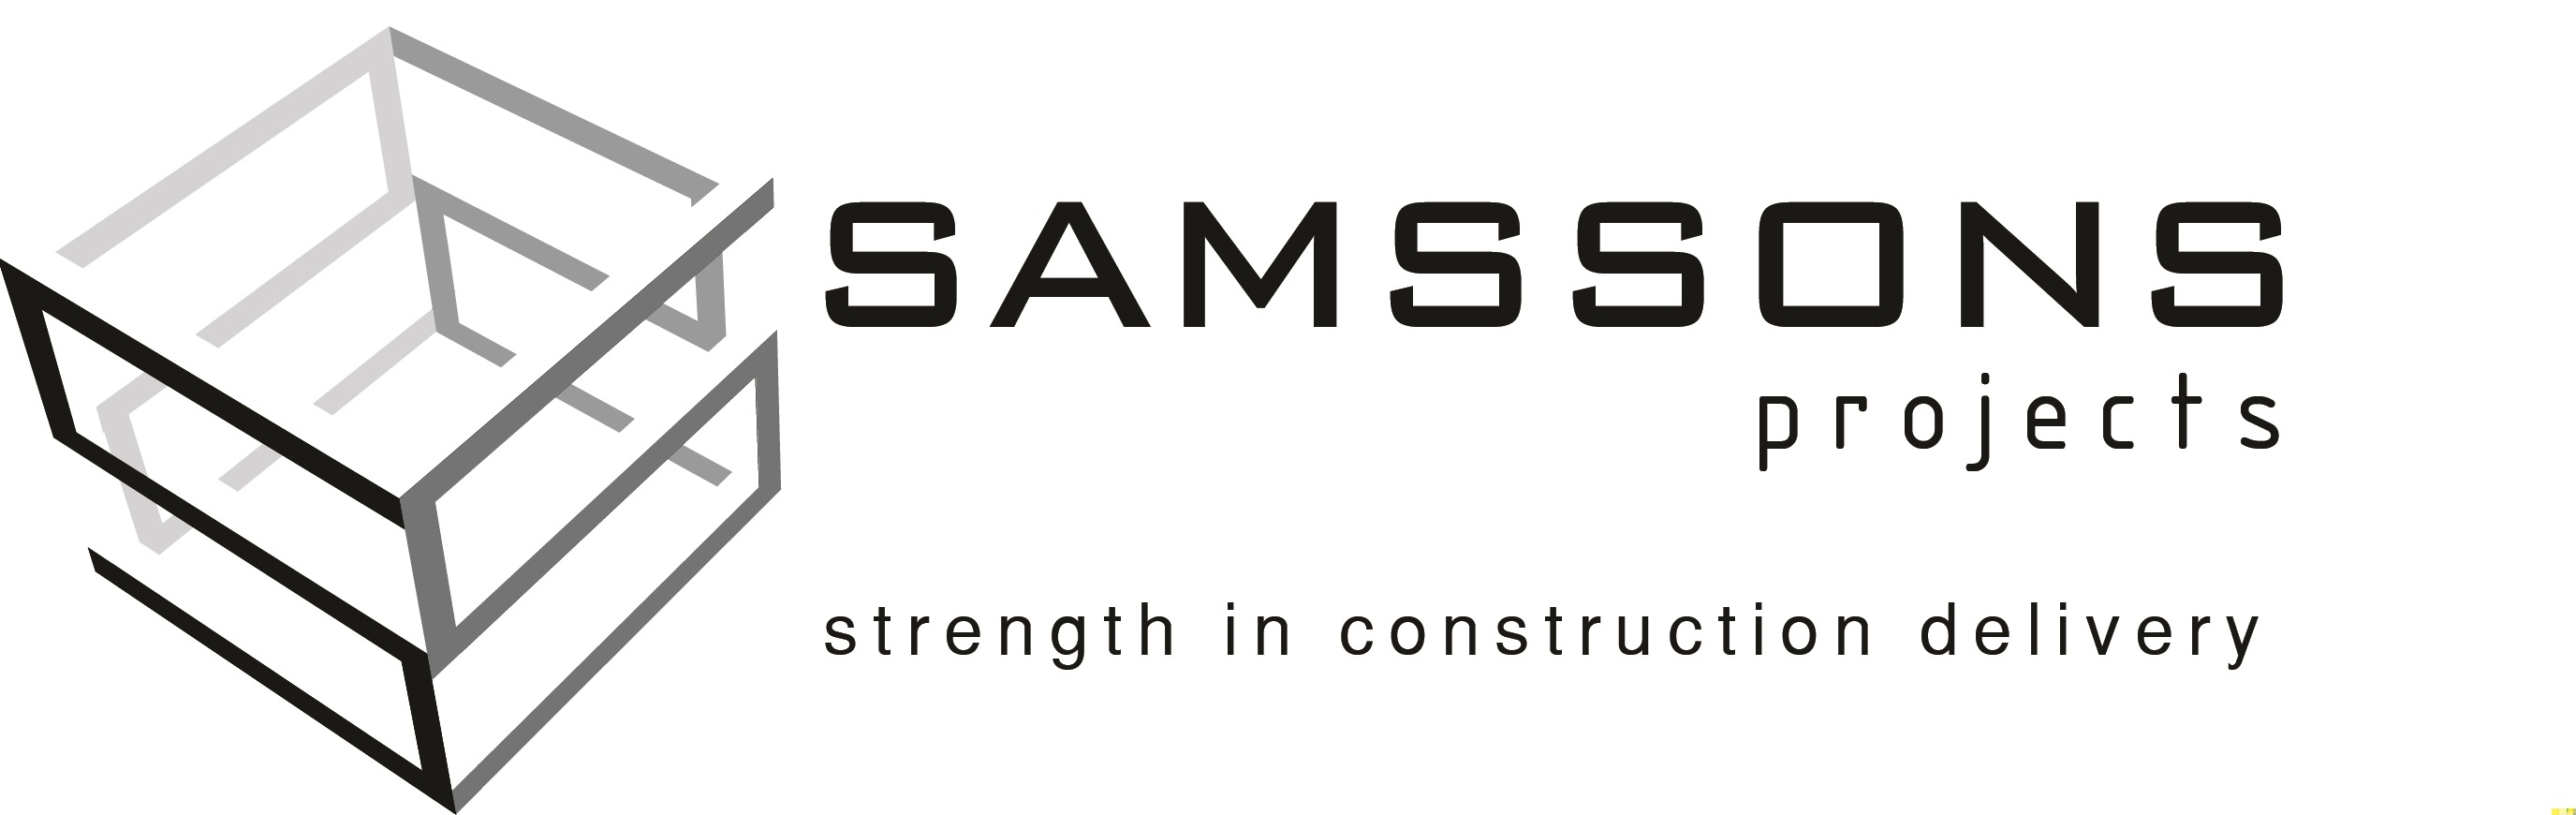 Samssons Projects - Site Safety Audit